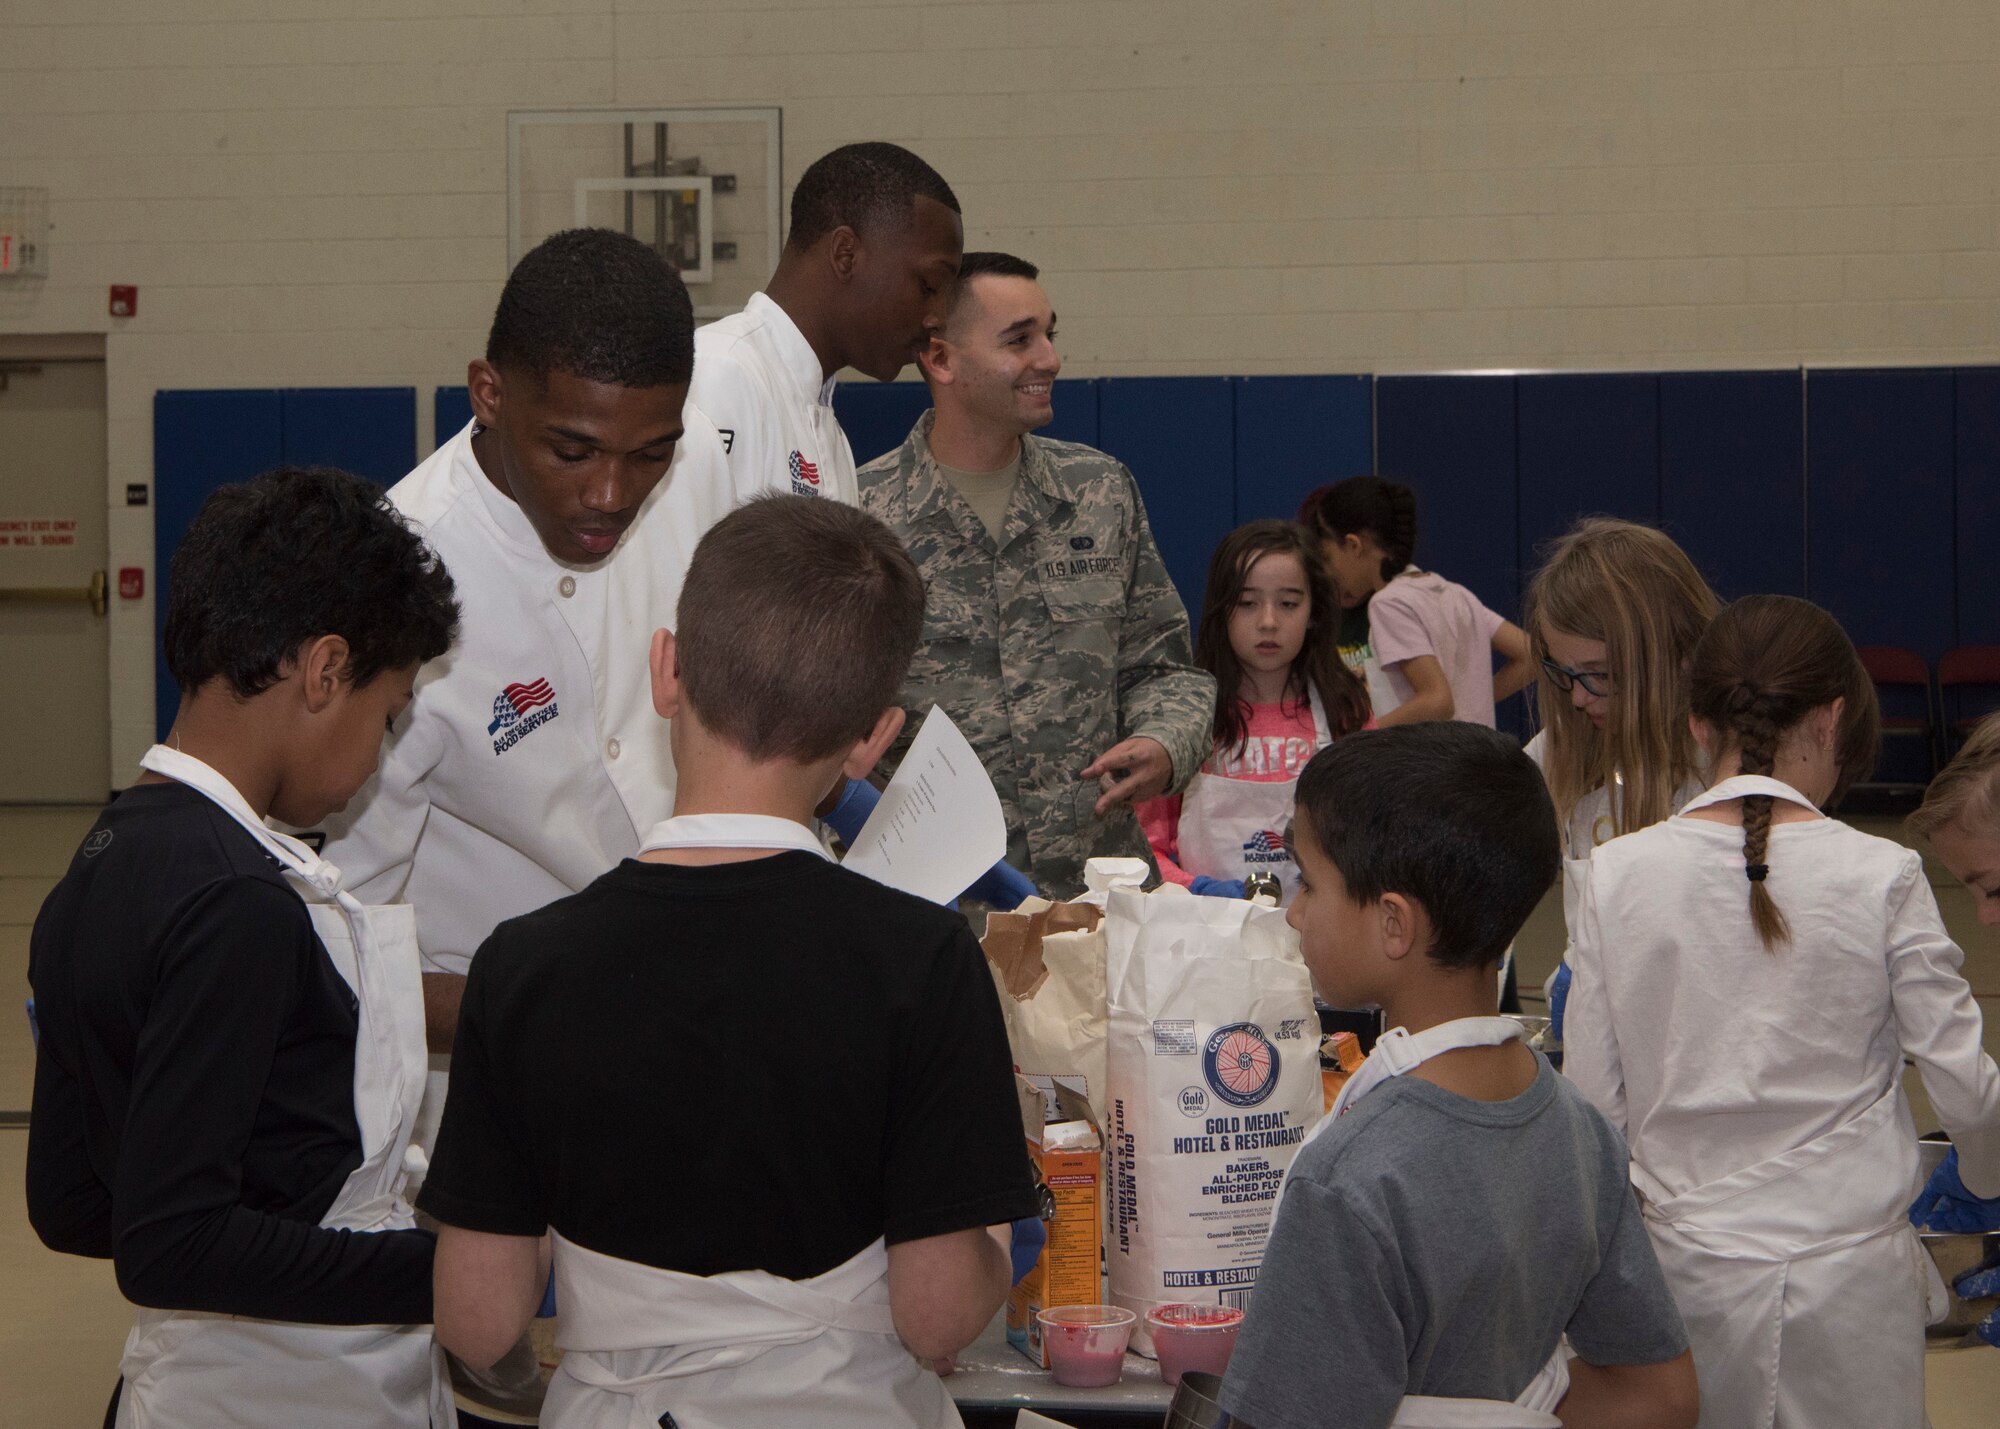 (From left to right) Airman 1st Class Malik Cherry, 49th Force Support Squadron food service specialist, and Airman 1st Class Dominick Bogier, 49th FSS food service apprentice, assist youth baking competition teams with gathering cookie ingredients, Jan. 30, 2019, on Holloman Air Force Base, N.M. Seventeen members of the Youth and Teen Center signed up for a cookie baking competition and the competition lasted two and a half hours. (U.S. Air Force photo by Airman Autumn Vogt)